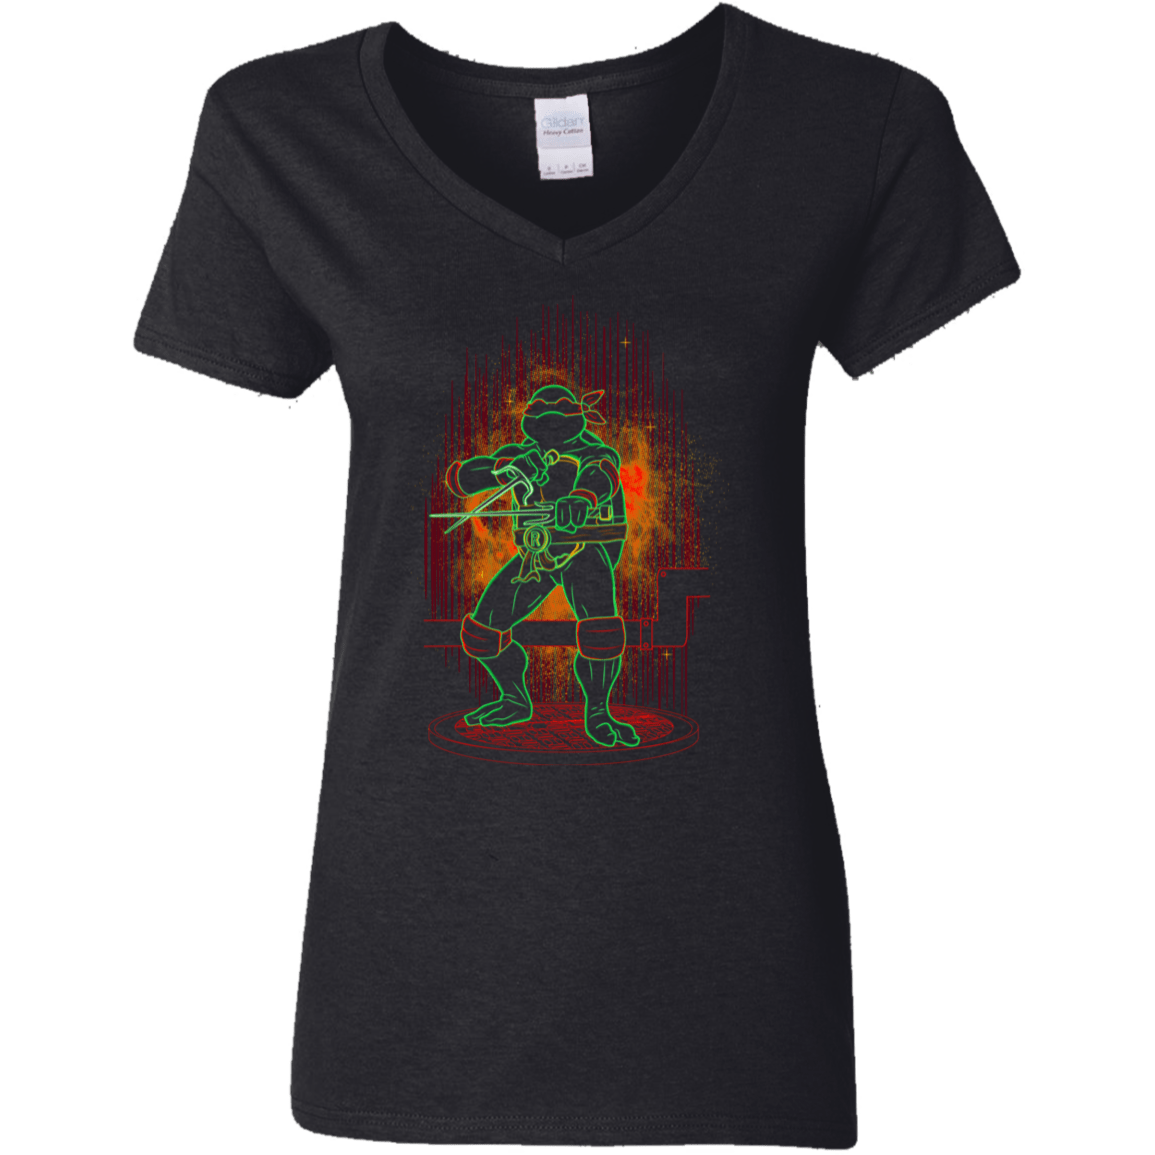 T-Shirts Black / S Shadow of the Red Mutant Women's V-Neck T-Shirt